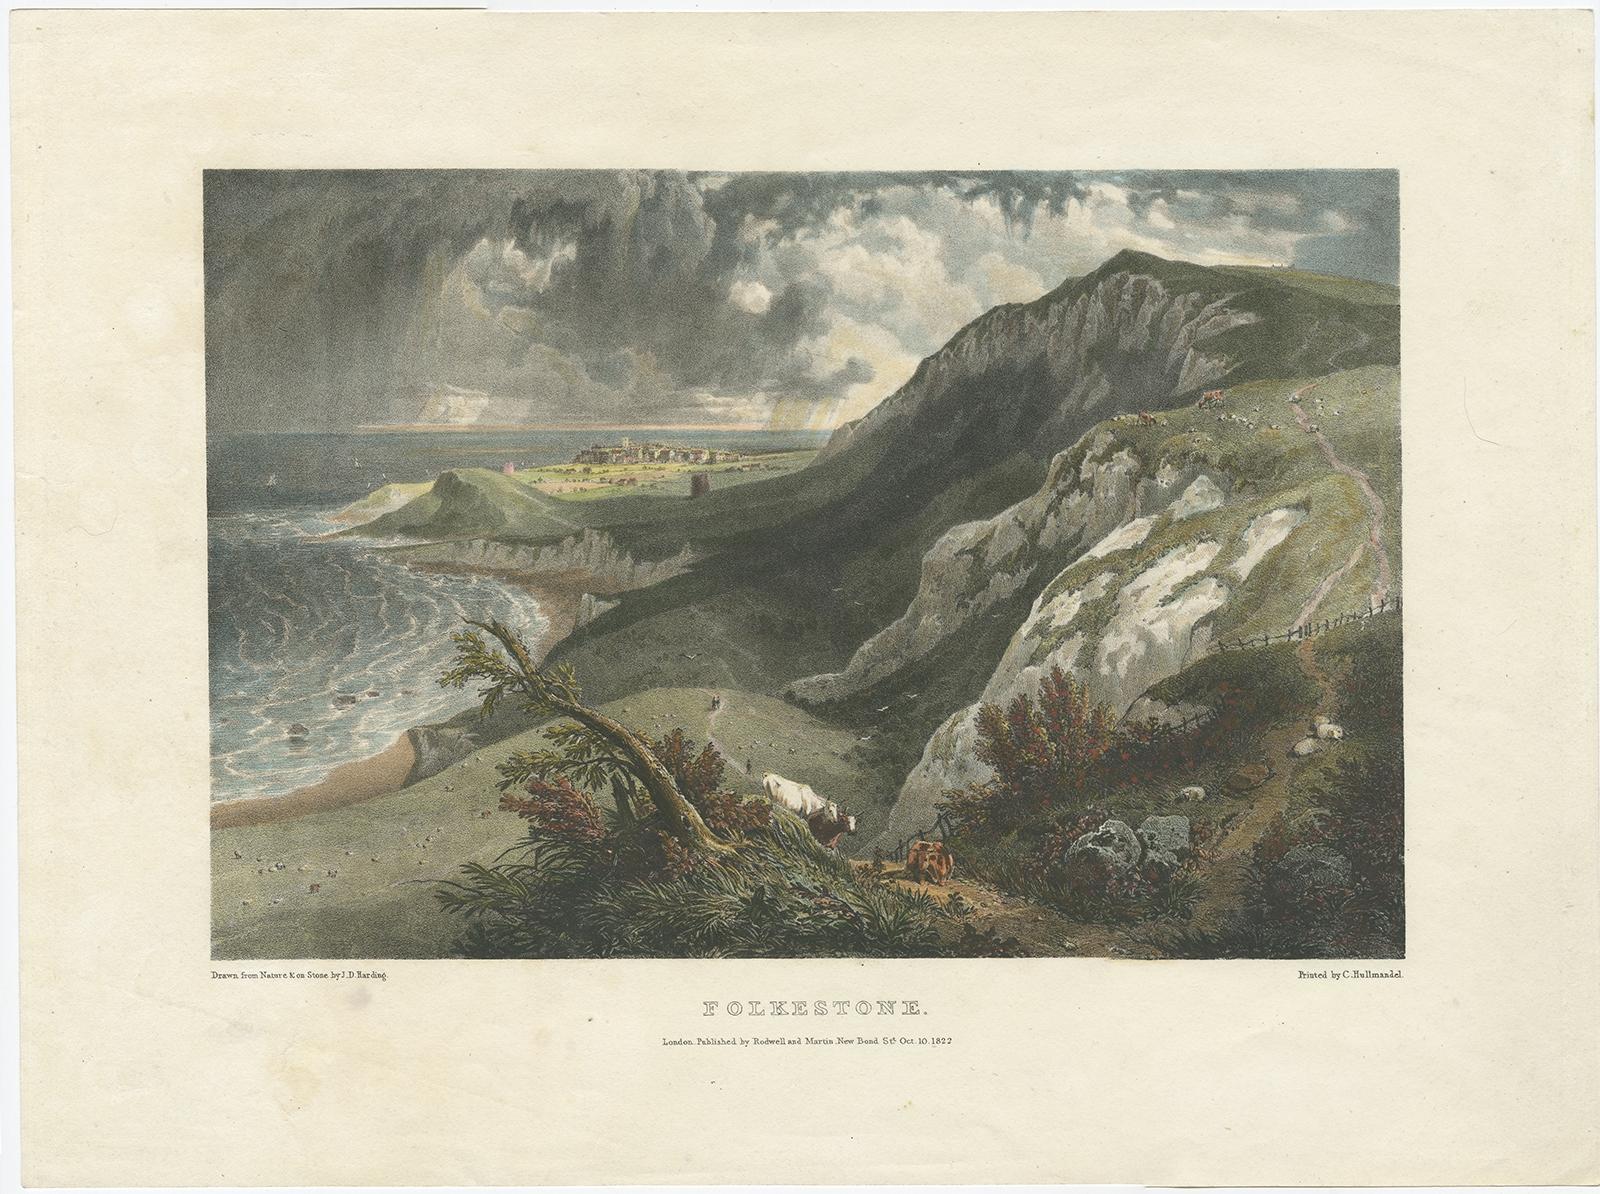 Antique print titled 'Folkestone'. 

This print depicts the town of Folkestone (United Kingdom) as seen from the East, the viewpoint high on the cliffs above the Warren, with cattle and sheep grazing on the grassy chalk above Wear Bay. Beyond are